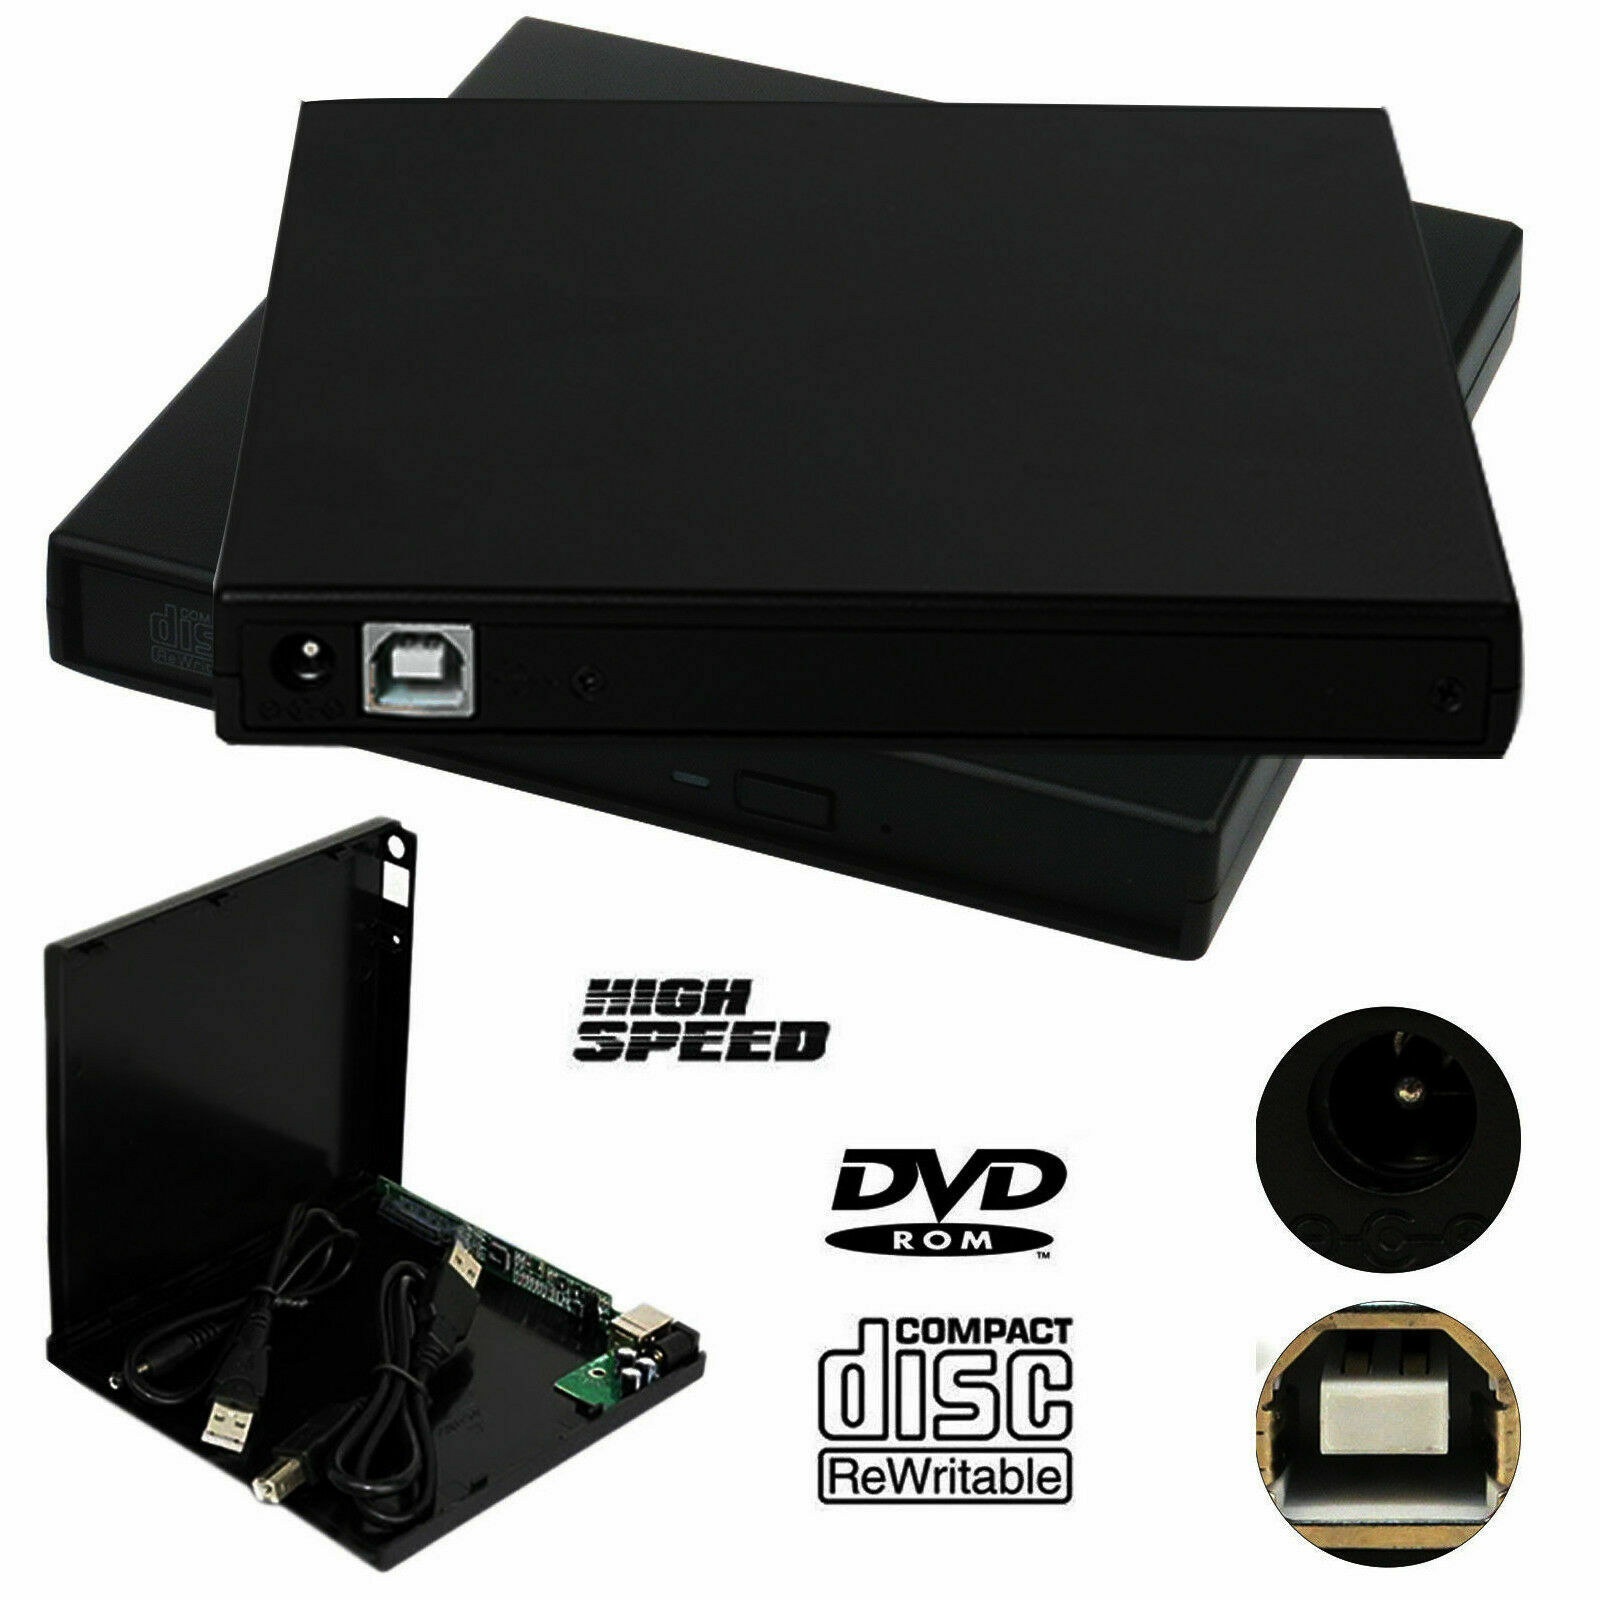 Laptop USB To SATA CD DVD Combo RW Rom External Drive Case Cover Caddy Enclosure